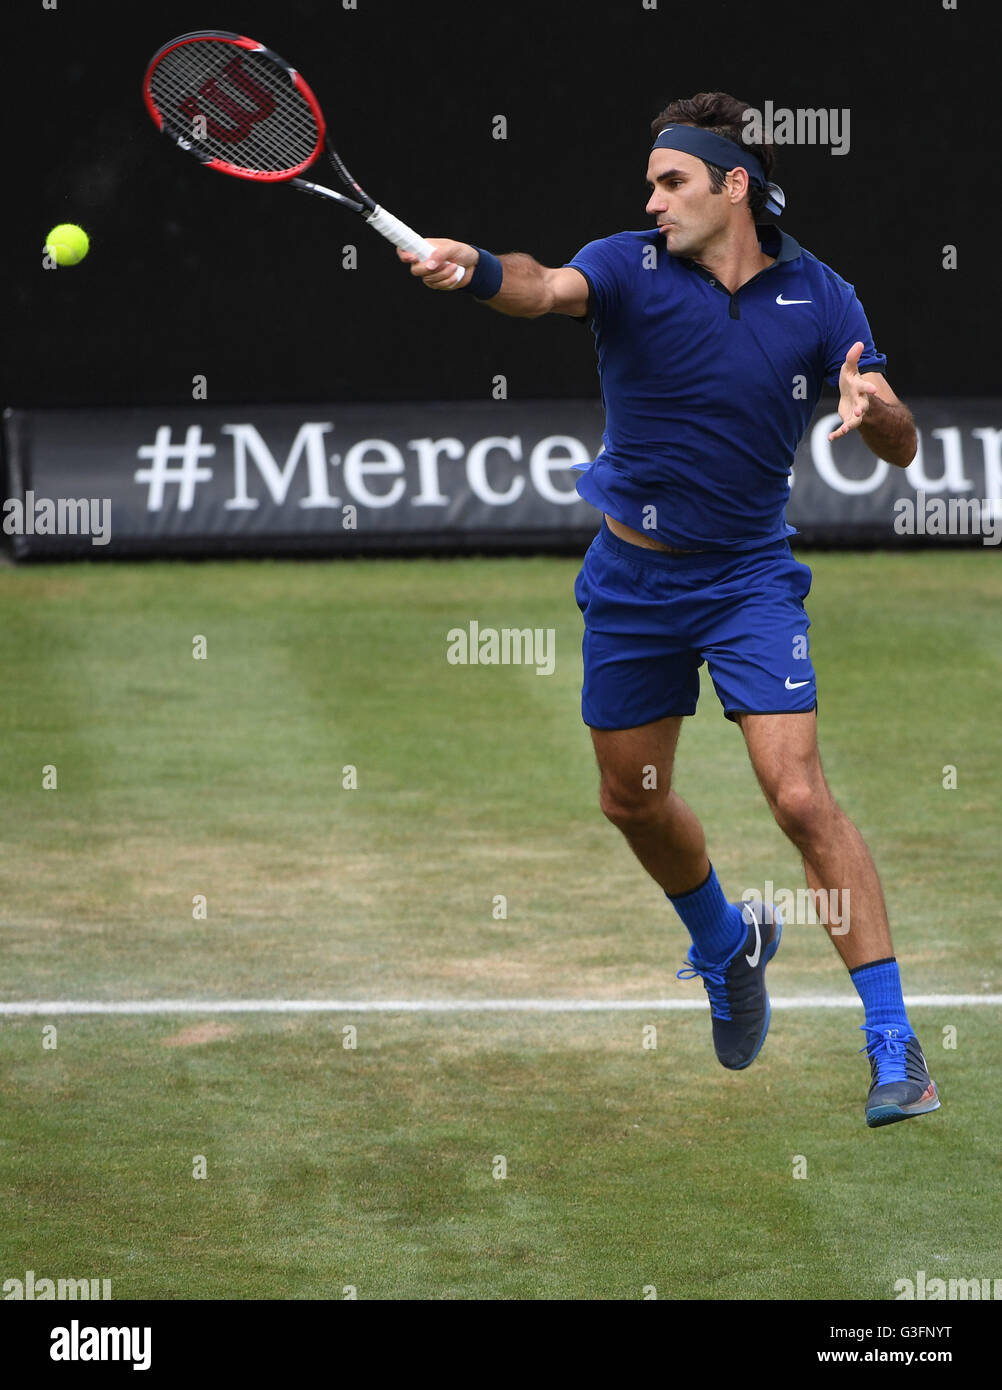 Stuttgart, Germany. 11th June, 2016. Roger Federer from Switzerland in  action against Fritz from the US during the ATP Tournament at Weissenhof in  Stuttgart, Germany, 11 June 2016. PHOTO: MARIJAN MURAT/dpa/Alamy Live